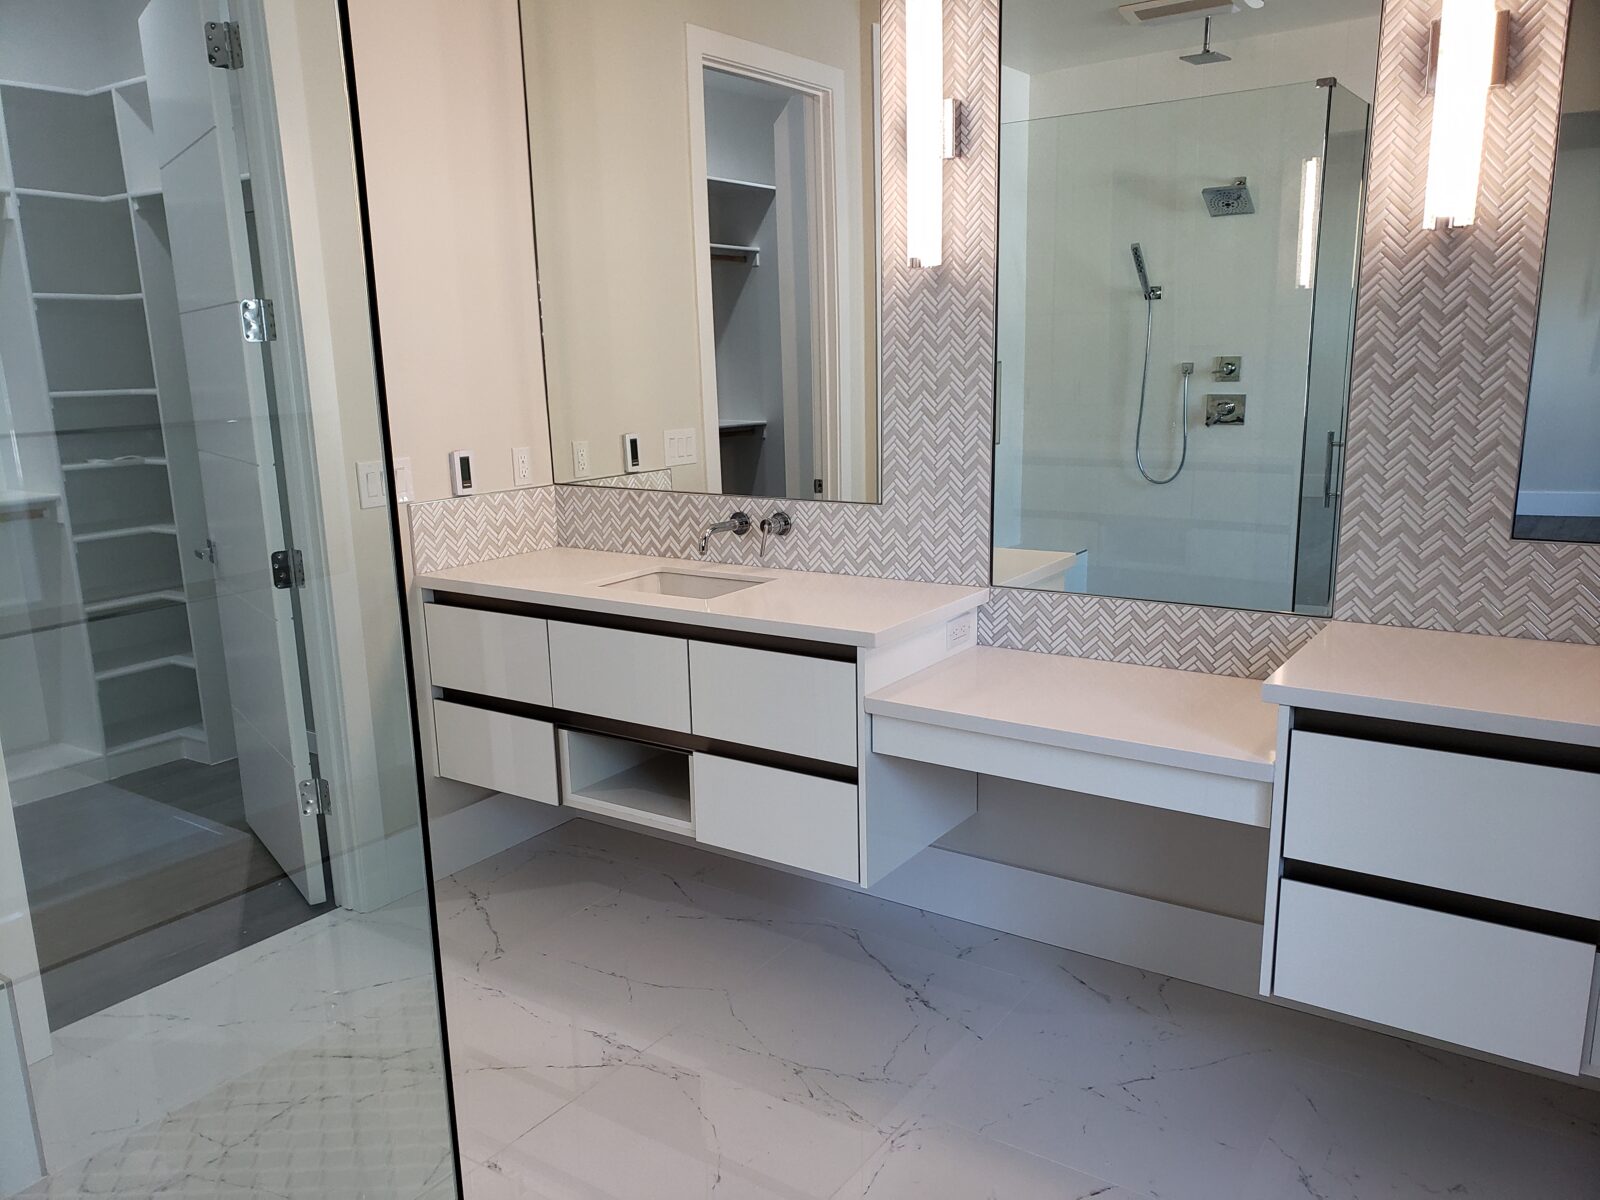 Floating cabinets bathroom. High gloss. Hanging cabinets. Gola channels.